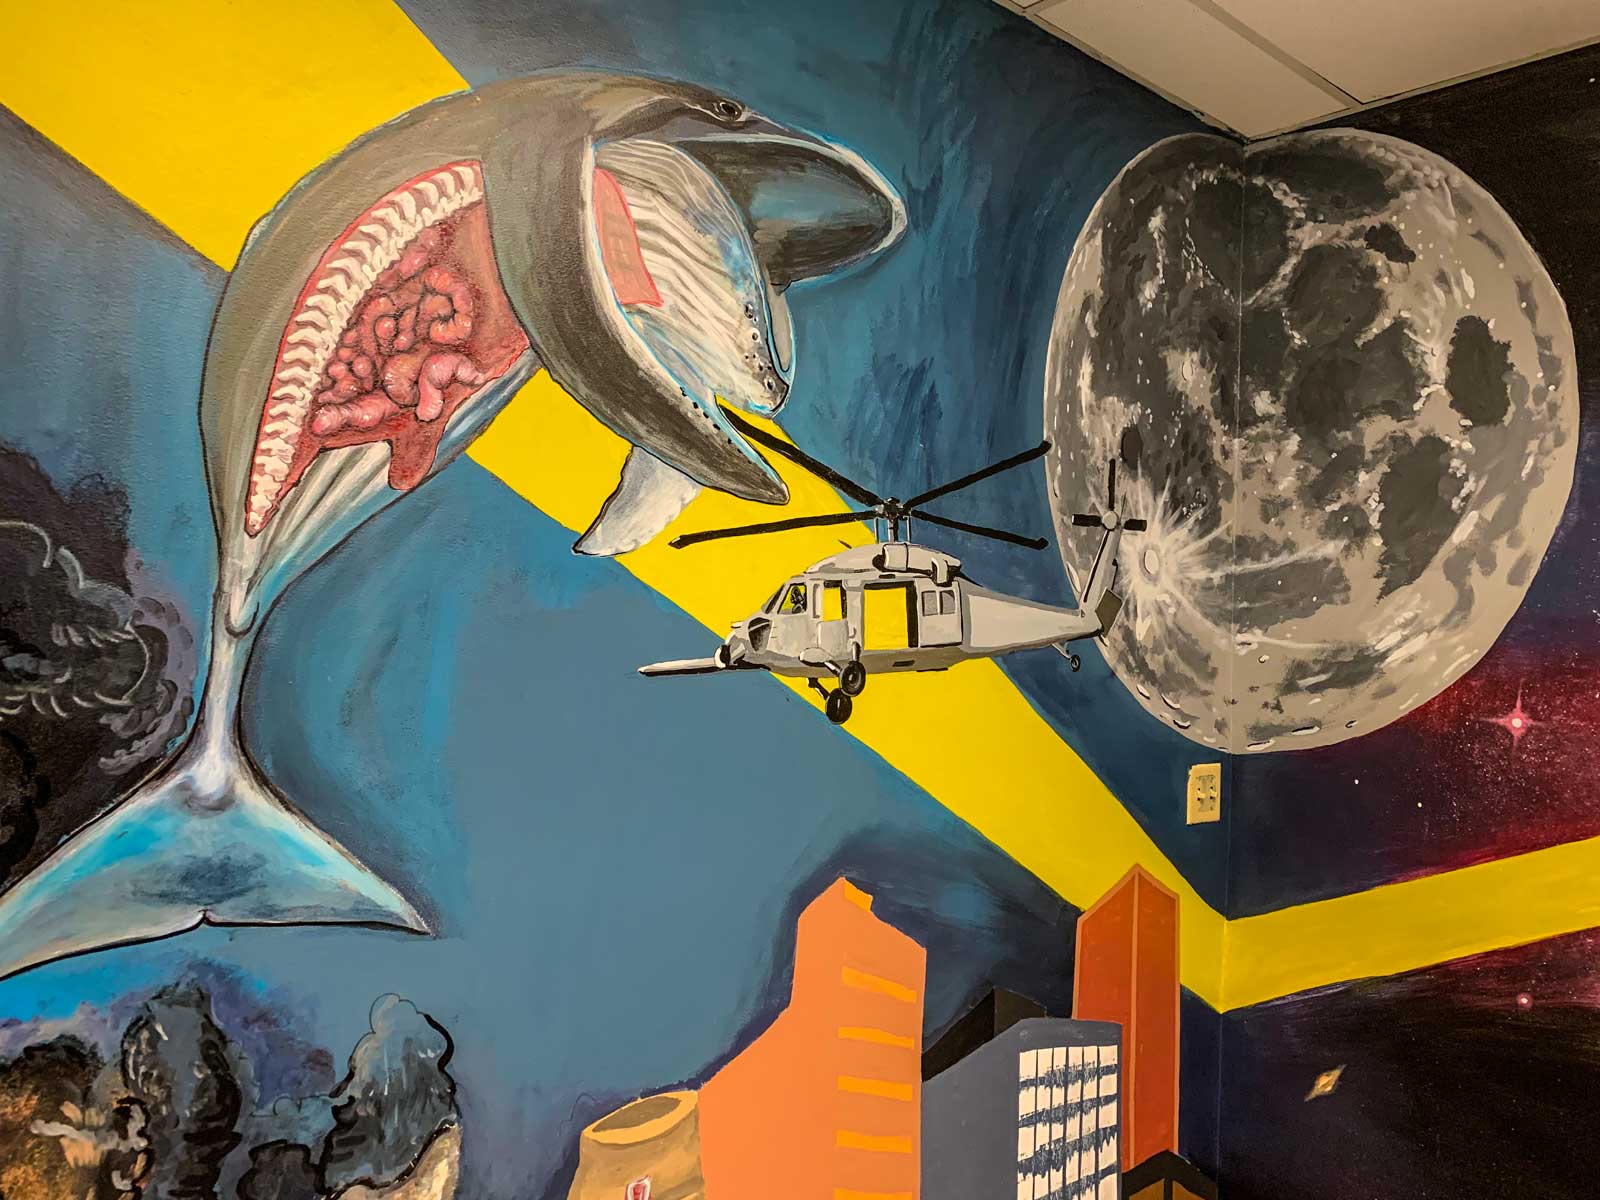 Painted mural in the entryway of the Science Building featuring the moon, a whale, buildings and a helicopter